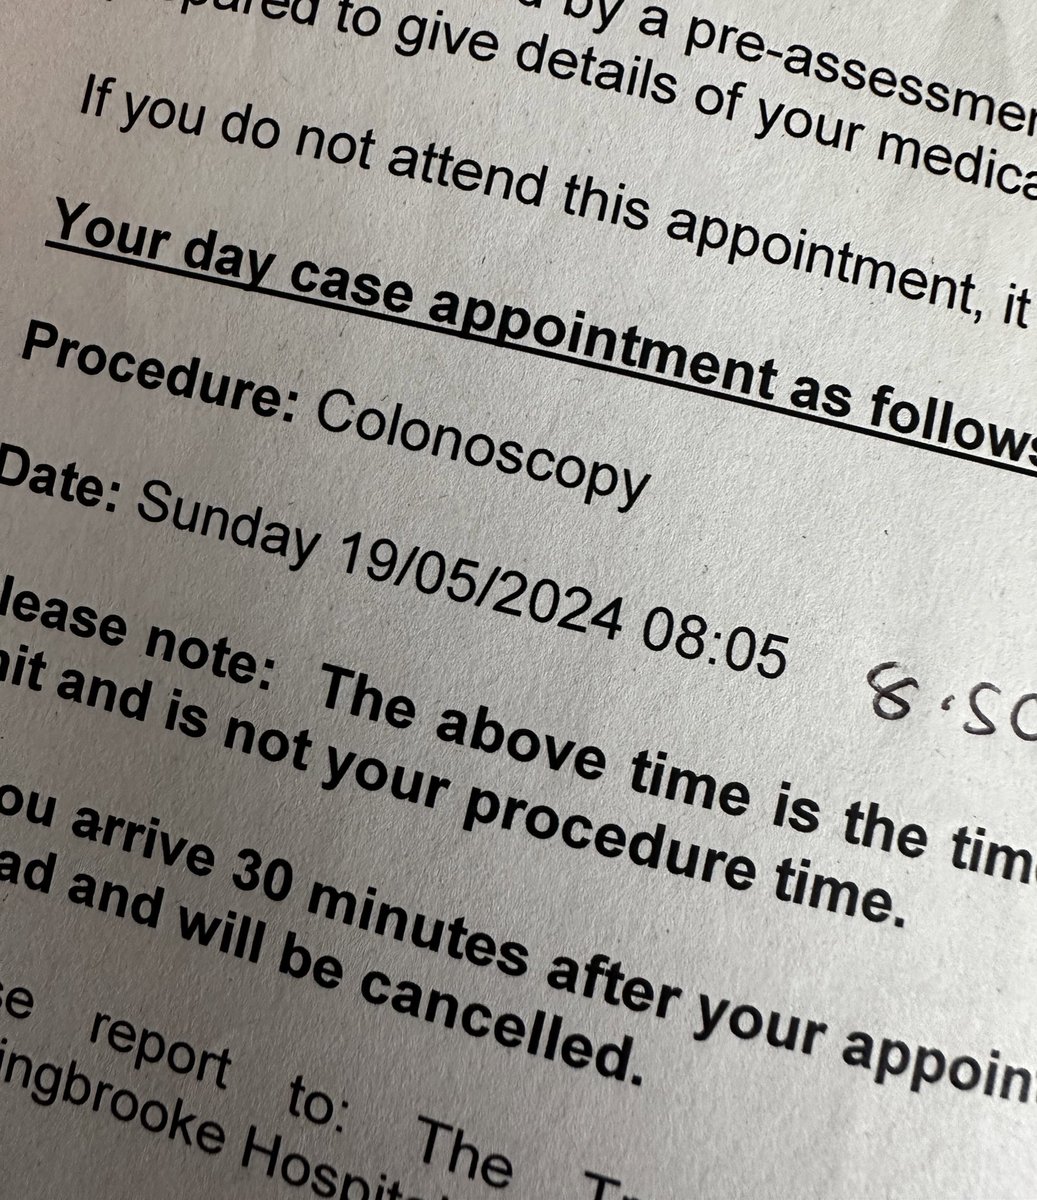 Not sure who is doing my colonoscopy today if NHS staff aren’t working weekends. The local plumber? 😆💩 #colonoscopy